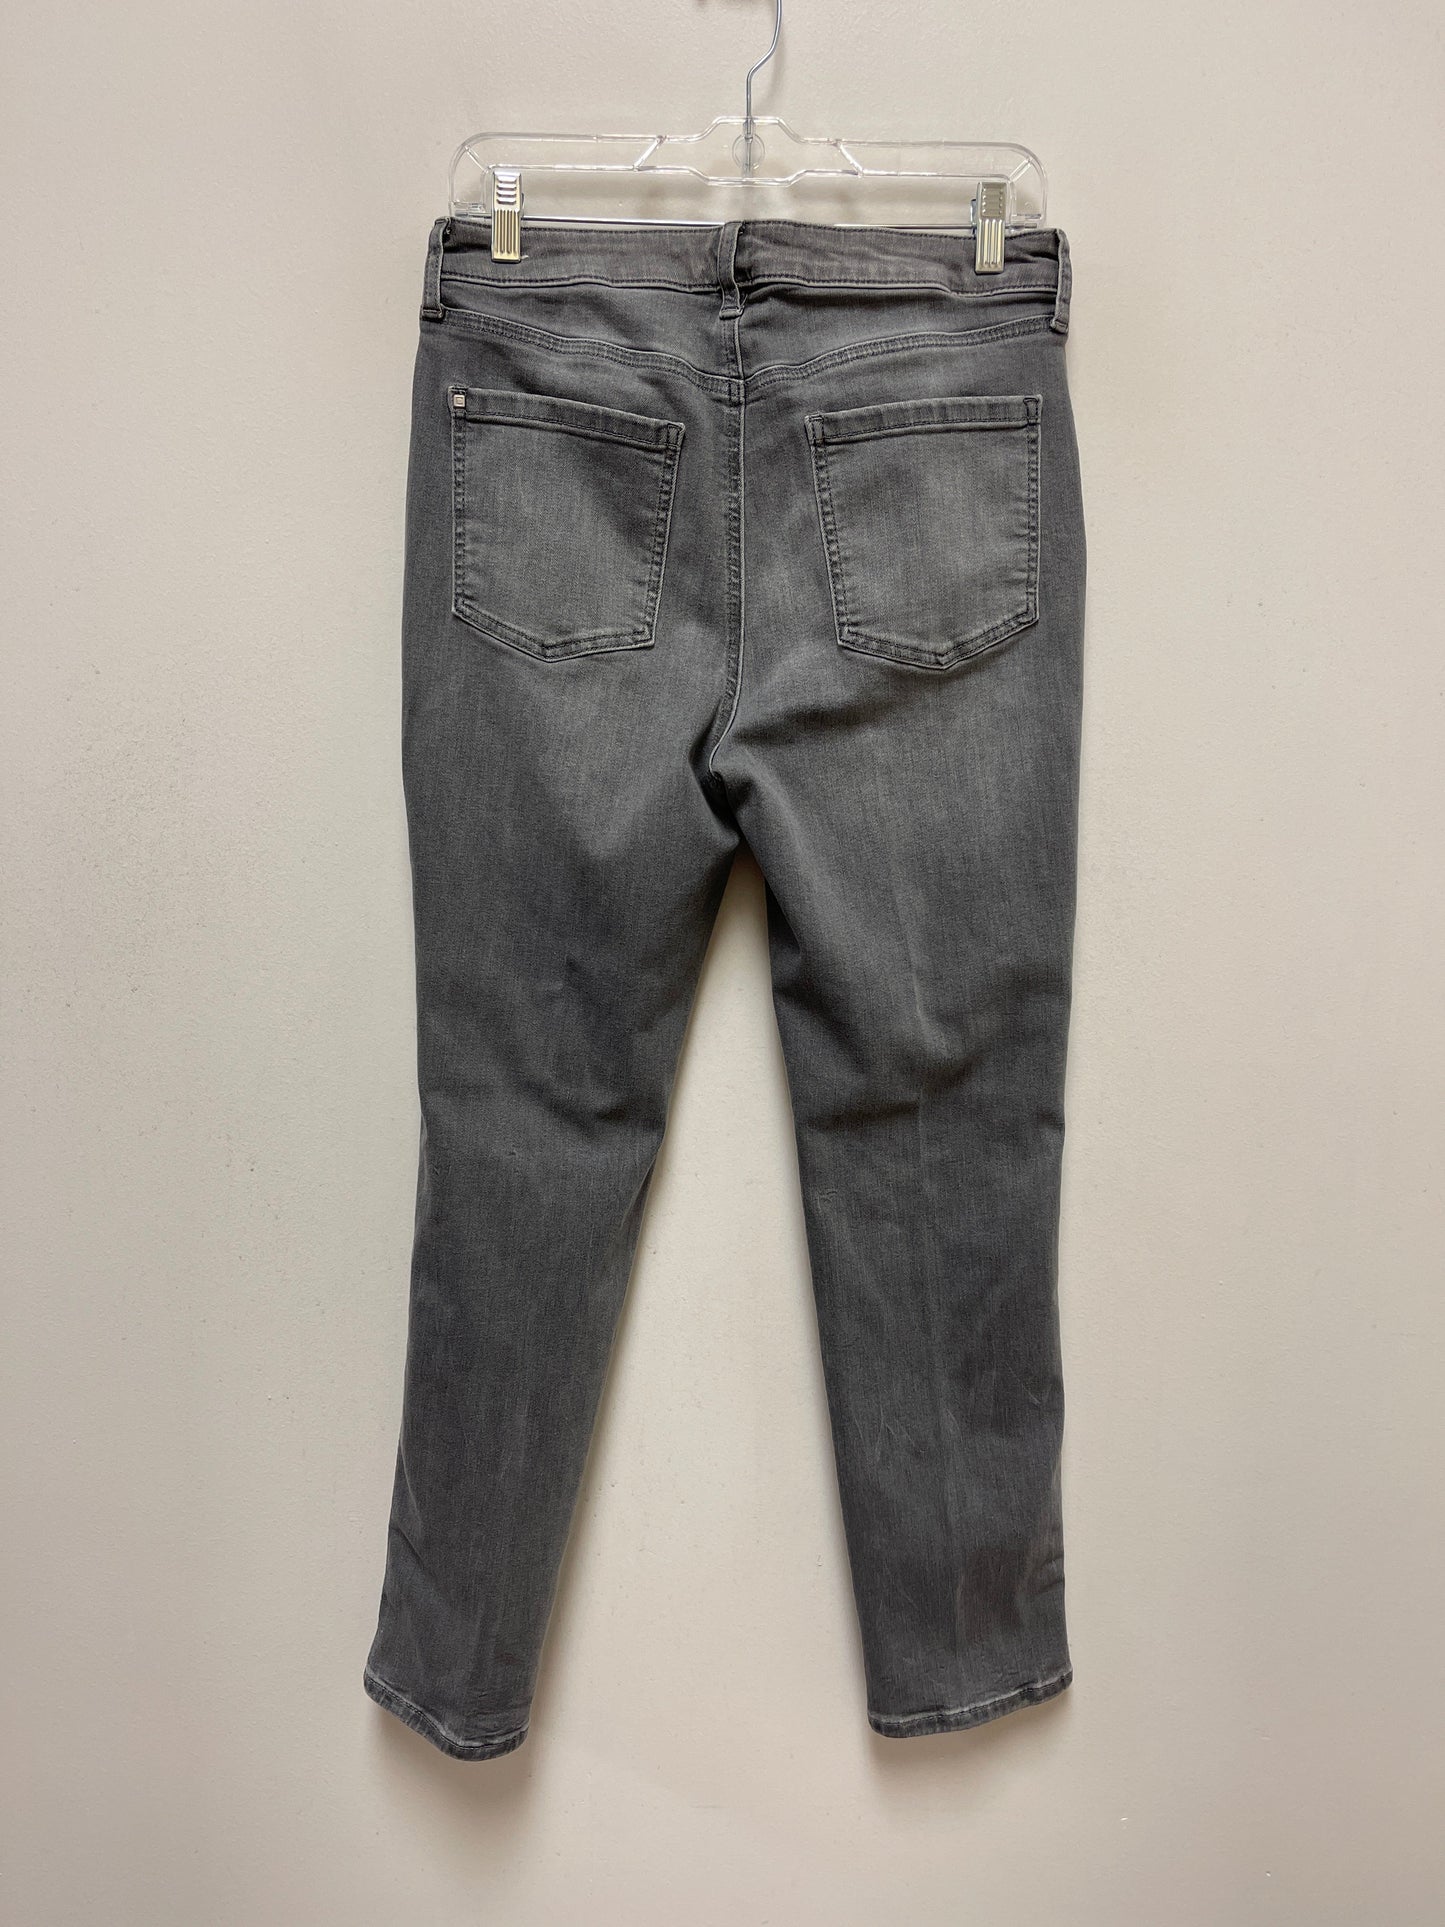 Grey Jeans Straight Chicos, Size 8